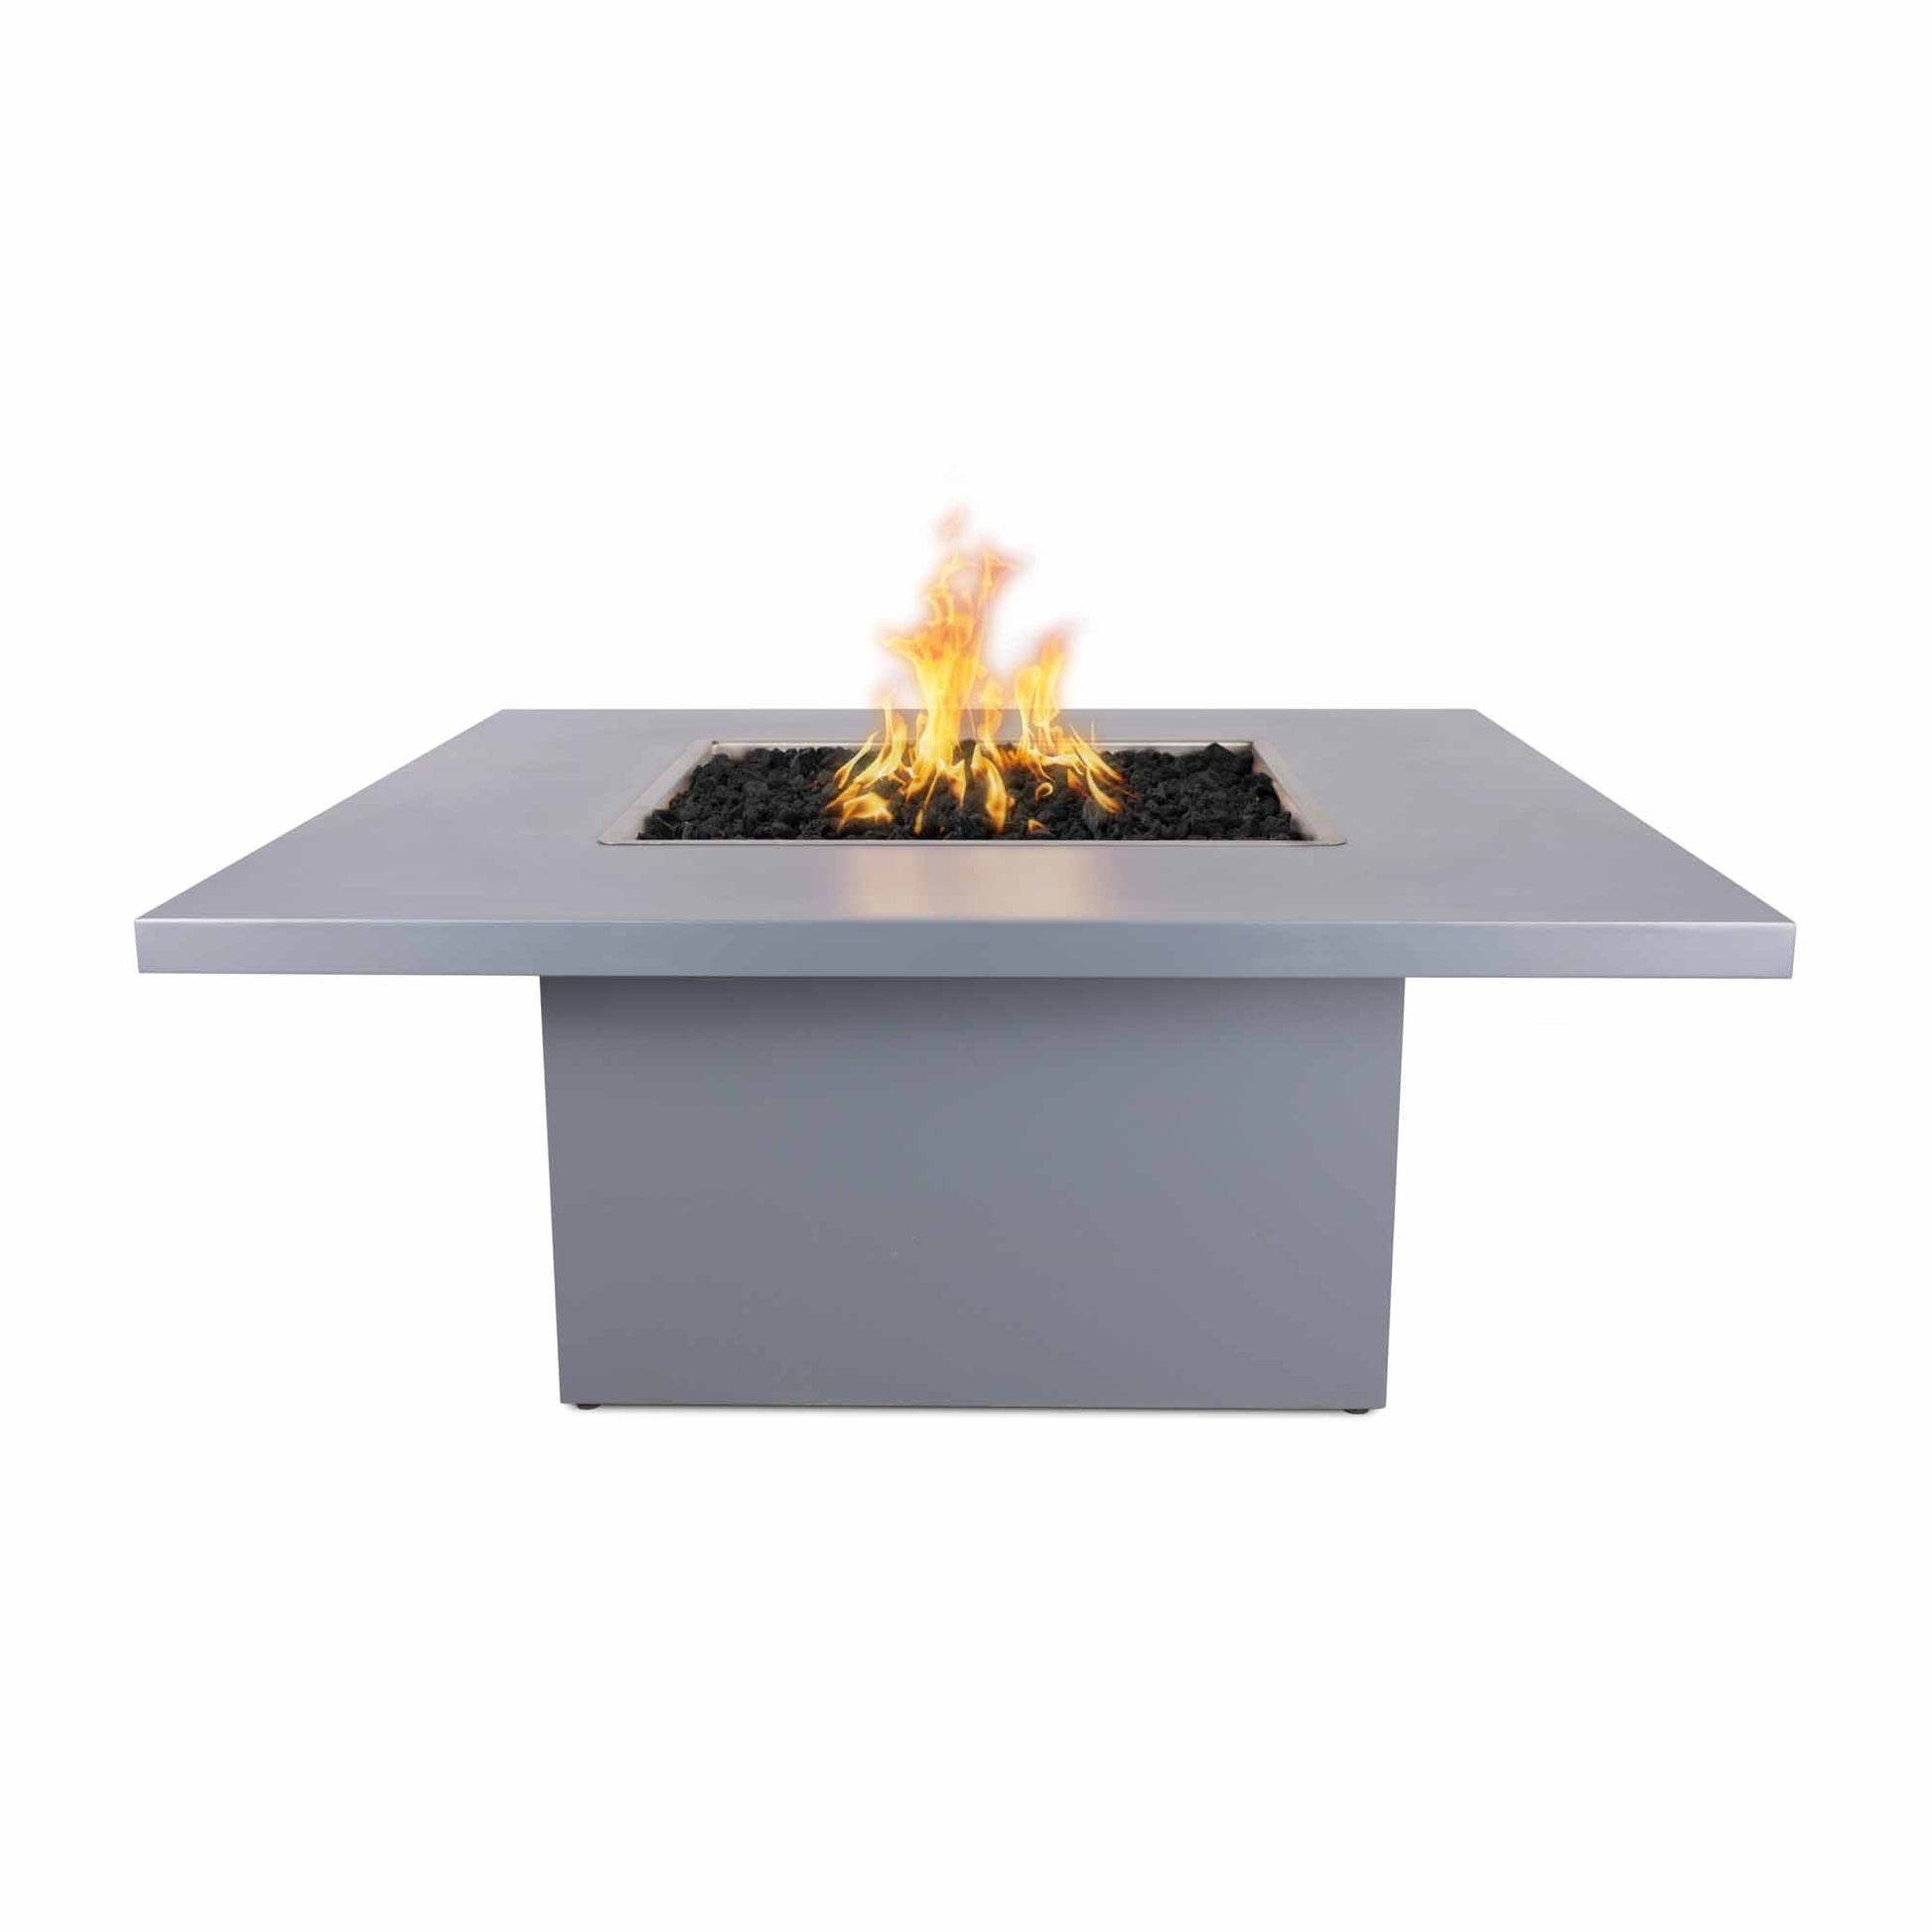 The Outdoor Plus Square Bella 36" Hammered Copper Natural Gas Fire Pit with Match Lit Ignition